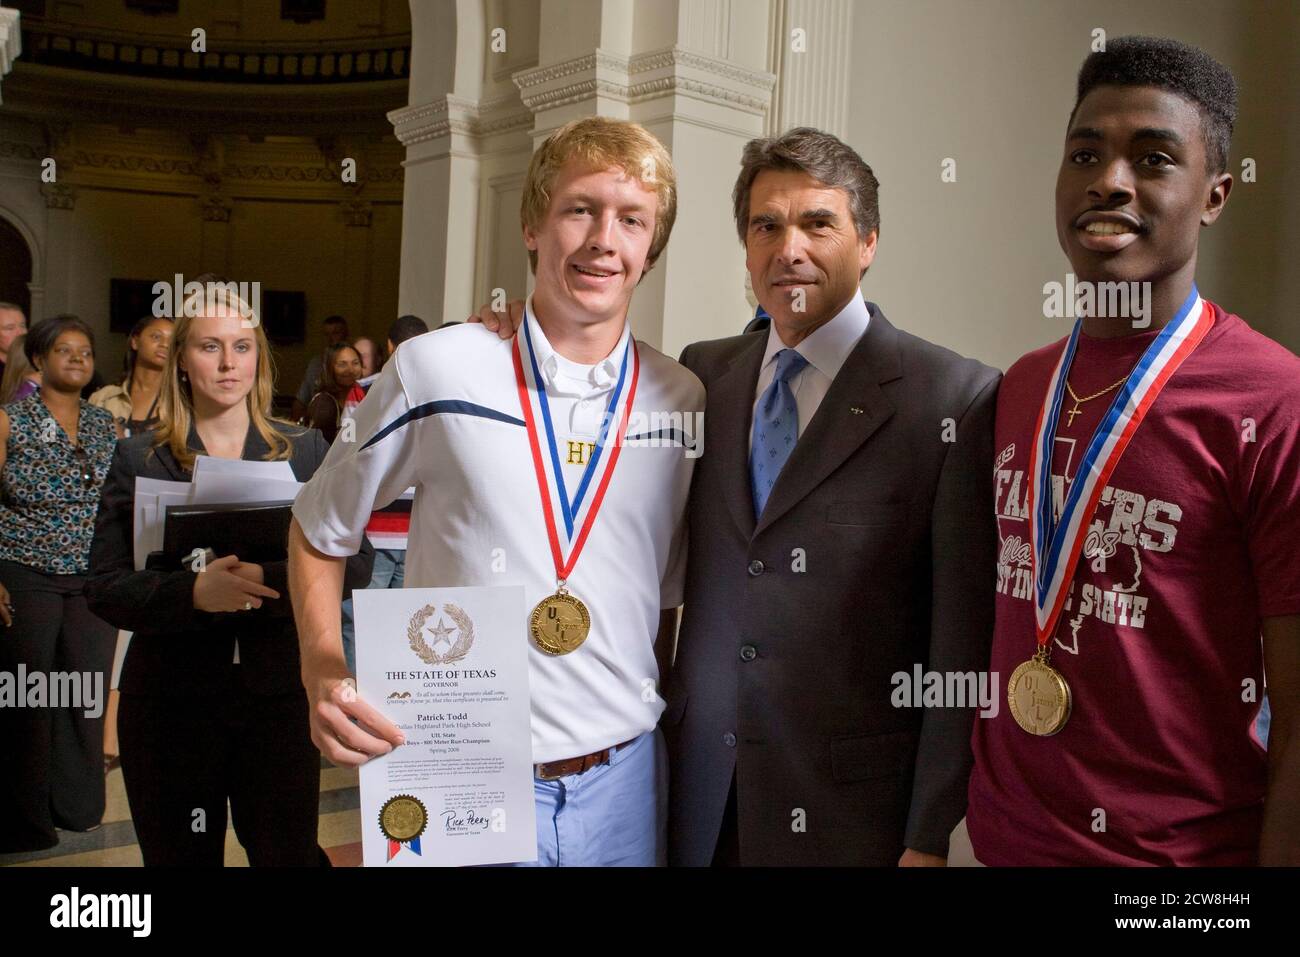 Austin, TX  June 18, 2008: High school state champions in spring sports and academics meet Texas Governor Rick Perry at the Texas Capitol for State Champions Day recognition. Stock Photo